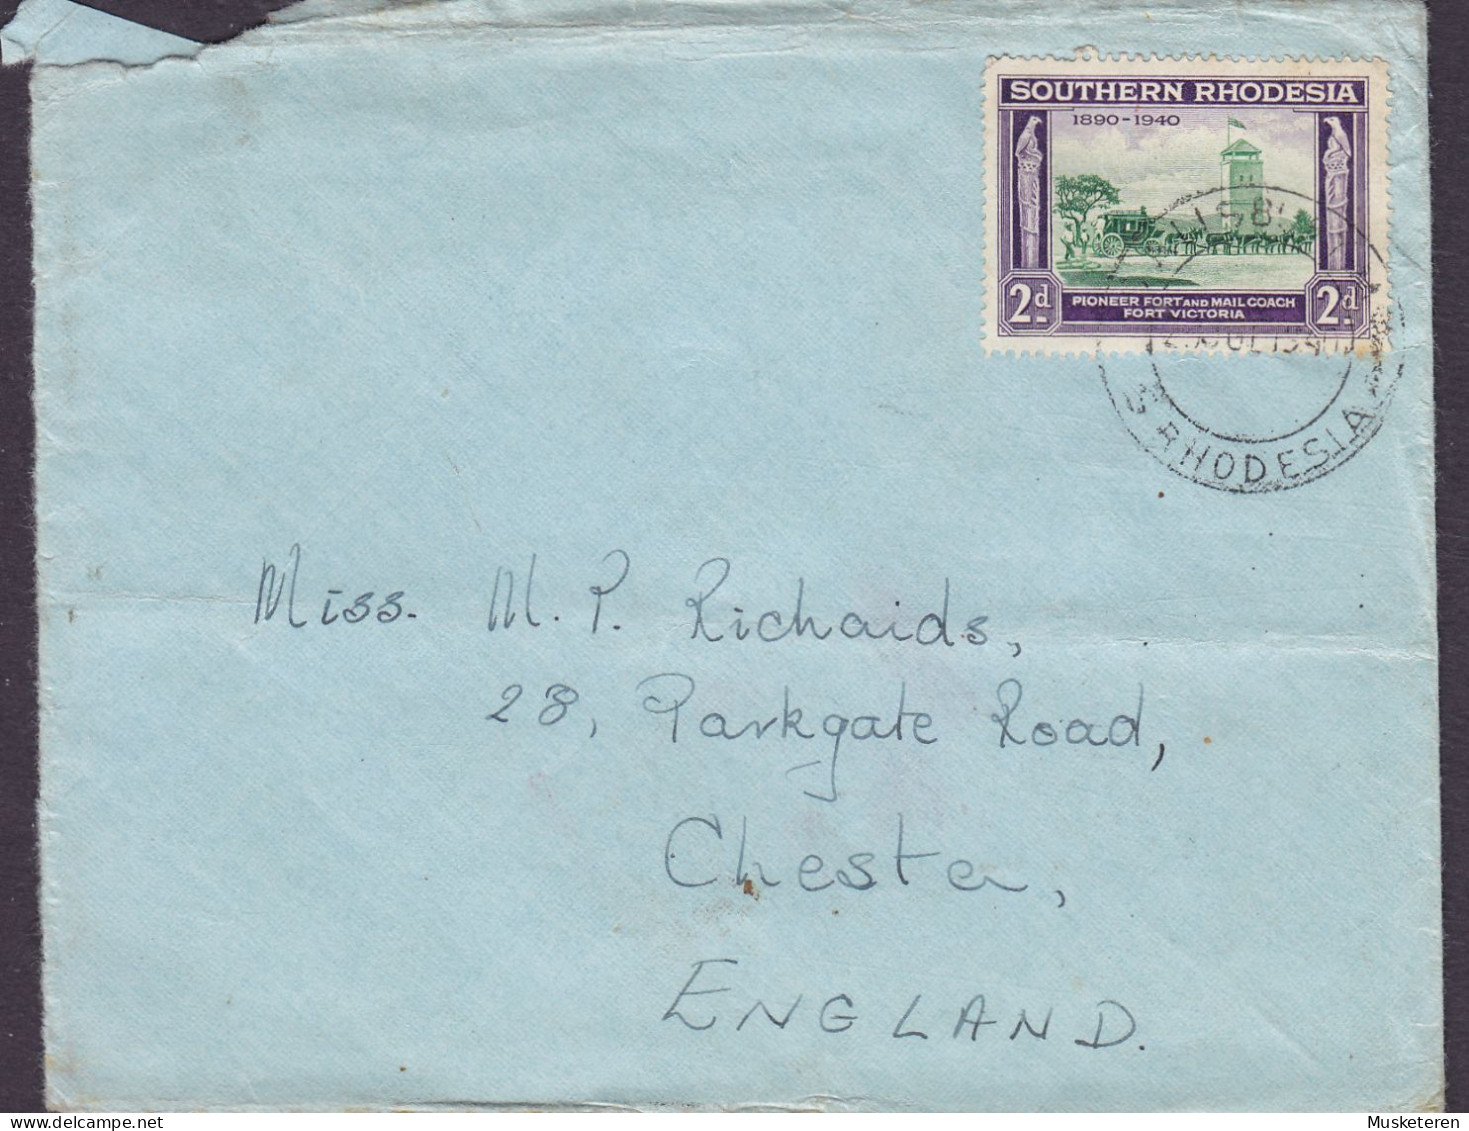 Southern Rhodesia Soldier BELVEDERE CAMP R.A.F. SALISBURY 1940 Cover Brief CHESTER England Fort Victoria & Mail Coach - Southern Rhodesia (...-1964)